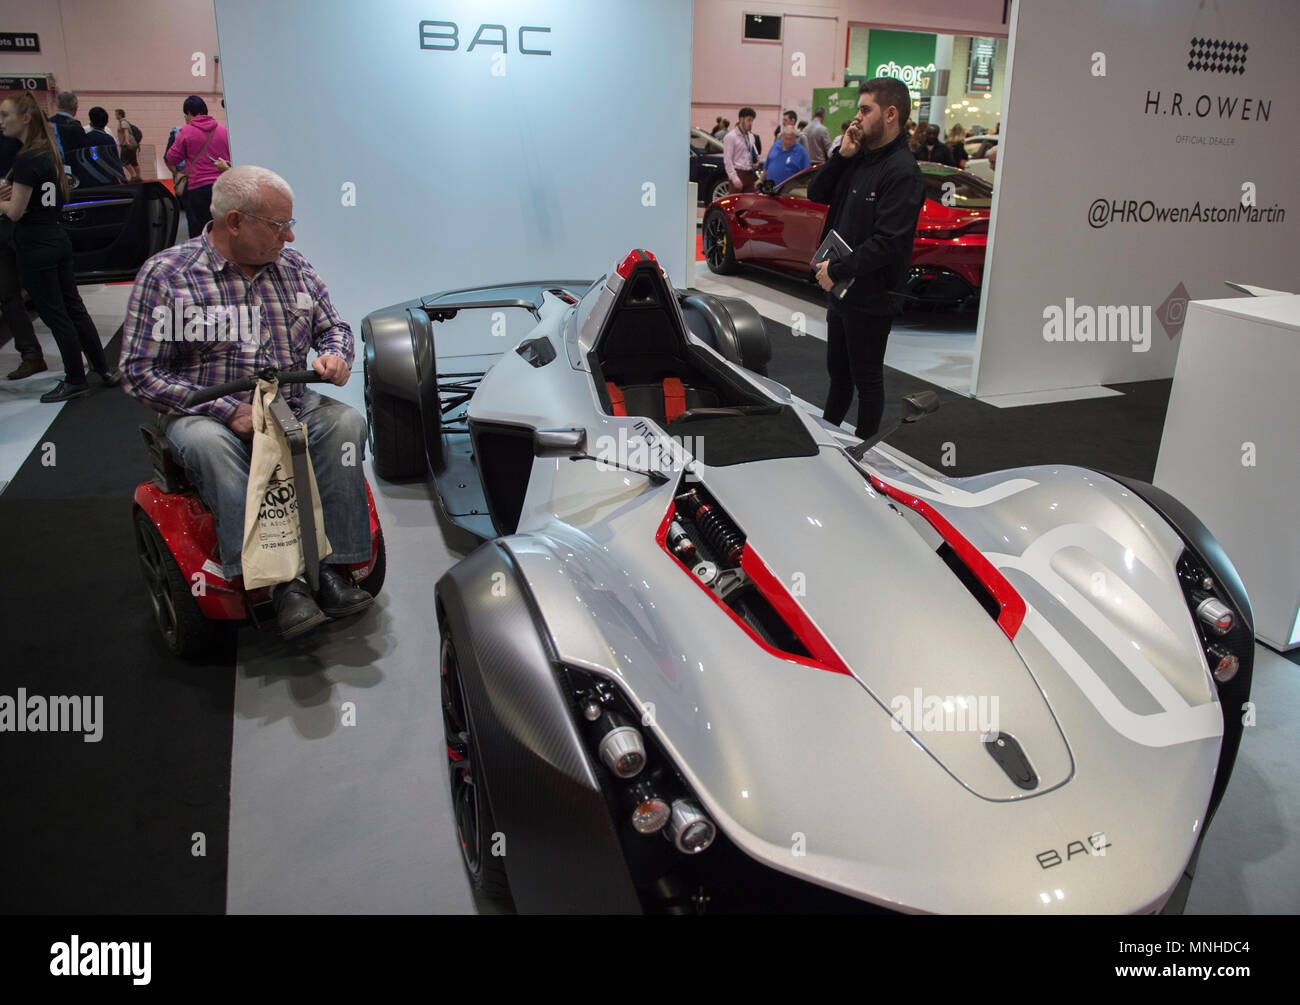 ExCel, London, UK. 17 May, 2018. The Confused.com London Motor Show event runs from 17-20 May 2018 with a space 4.5 times bigger than last year. Photo: The BAC Mono on H R Owen stand is a British designed road-legal Formula racing level car with 0-60mph acceleration in 2.8 secs. Credit: Malcolm Park/Alamy Live News. Stock Photo